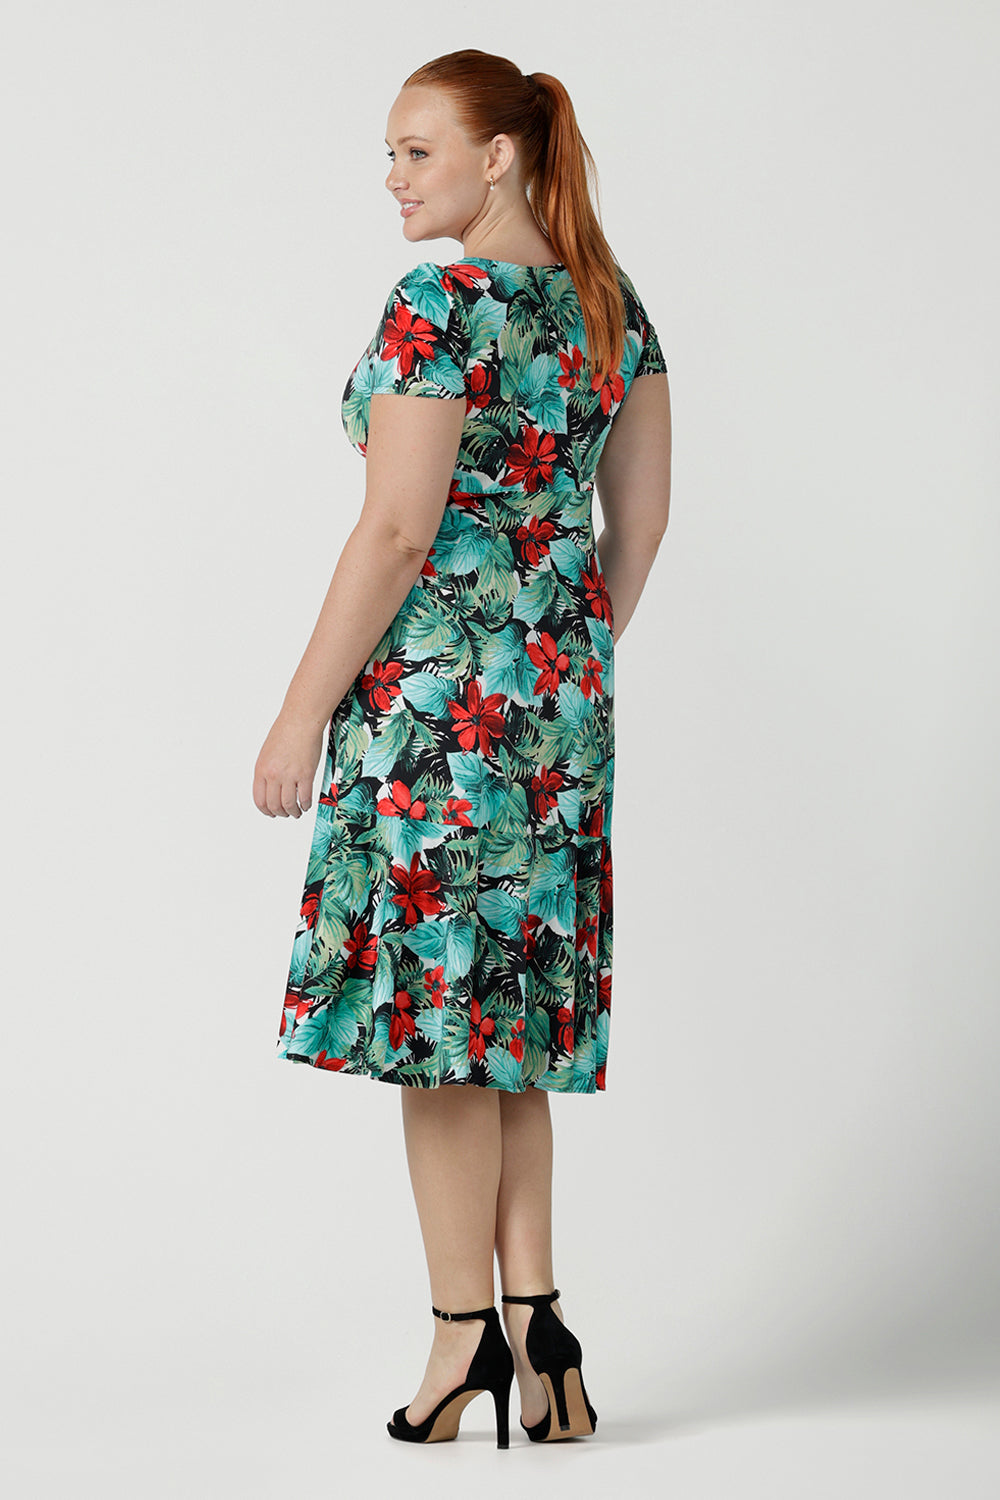 Back view of a size 12 woman wears the Jillian dress in Havana. A beautiful tropical print with a green leaf print and red flower on a white base that is tropical inspired. A sweetheart neckline style with an empire line. Tier on hem. Made in Australia for women. Size 8 - 24.